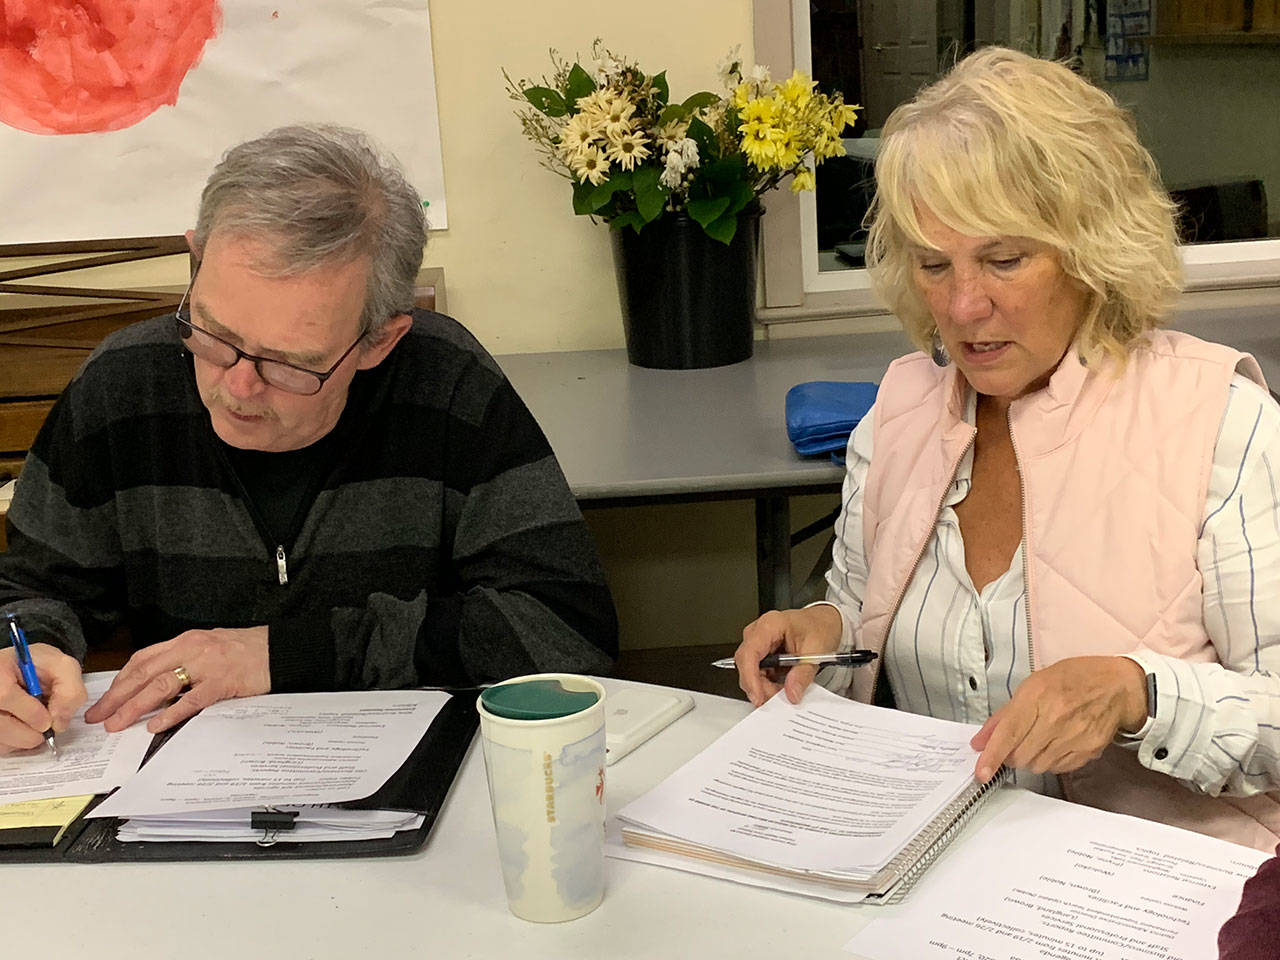 Tom Langland, president of the board of commissioners for the Vashon Health Care District, and fellow commissioner LeeAnn Brown, fill out paperwork after the district’s meeting on March 4, at the presbyterian church. (Kevin Opsahl/Staff Photo)